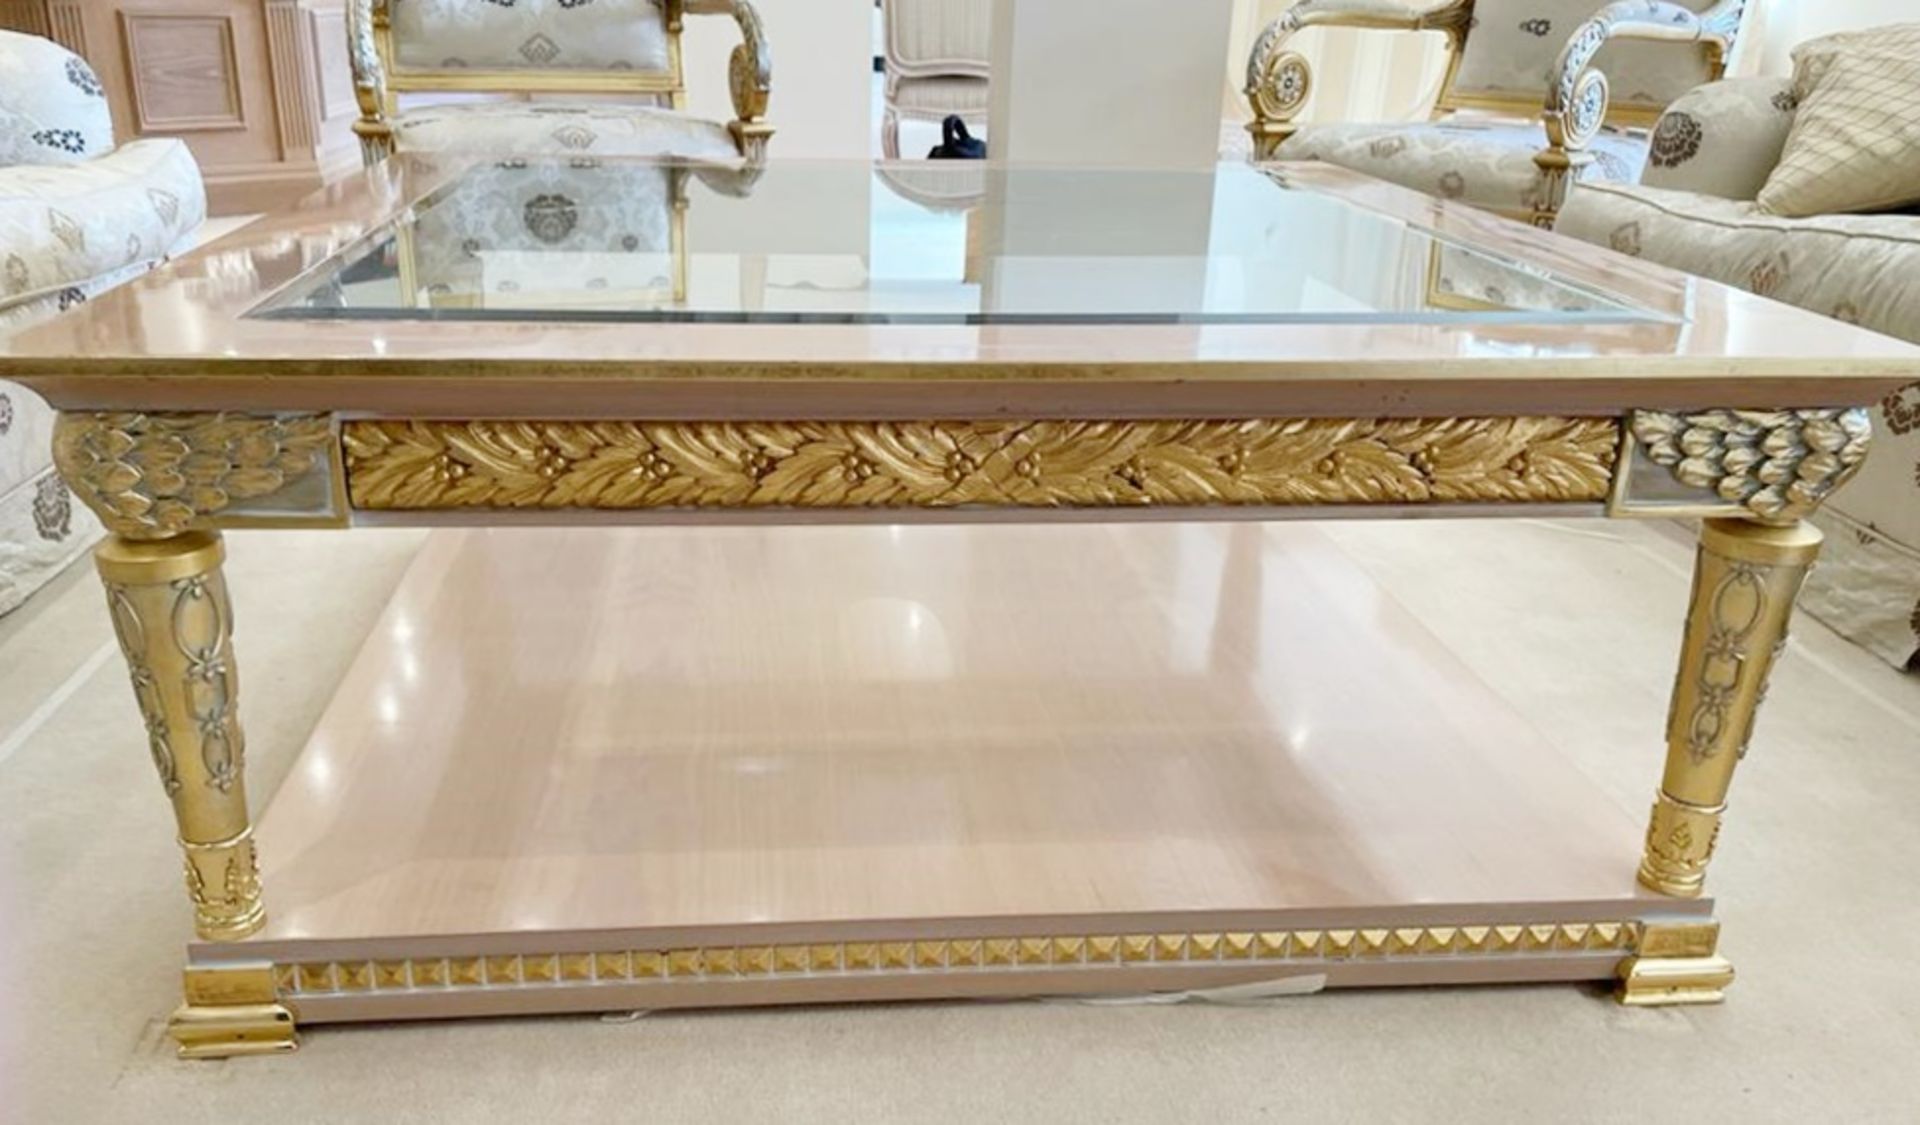 1 x Hand Carved Coffee Table Complimented With Birchwood Veneer, Golden Pillar Legs, Carved Wing - Image 8 of 12